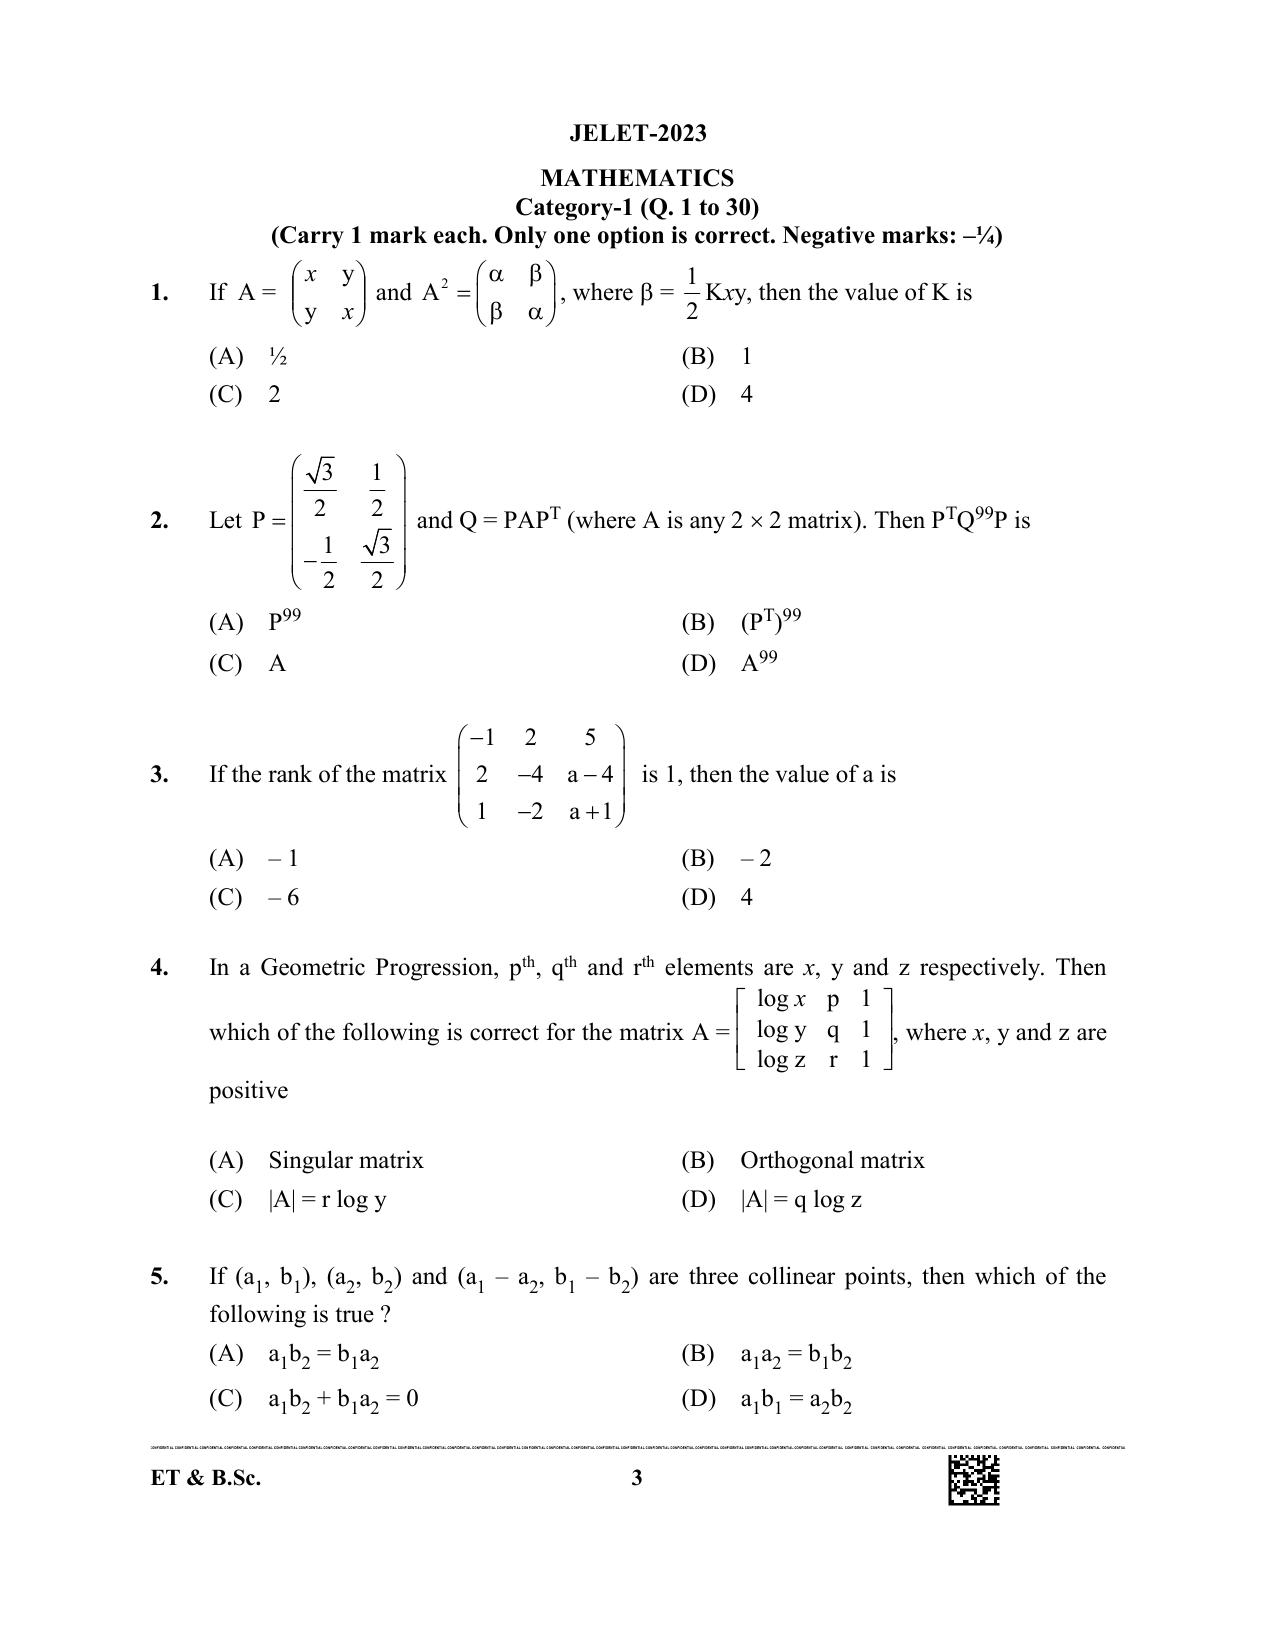 WBJEE JELET 2023 Paper I (ET & BSC) Question Papers - Page 3